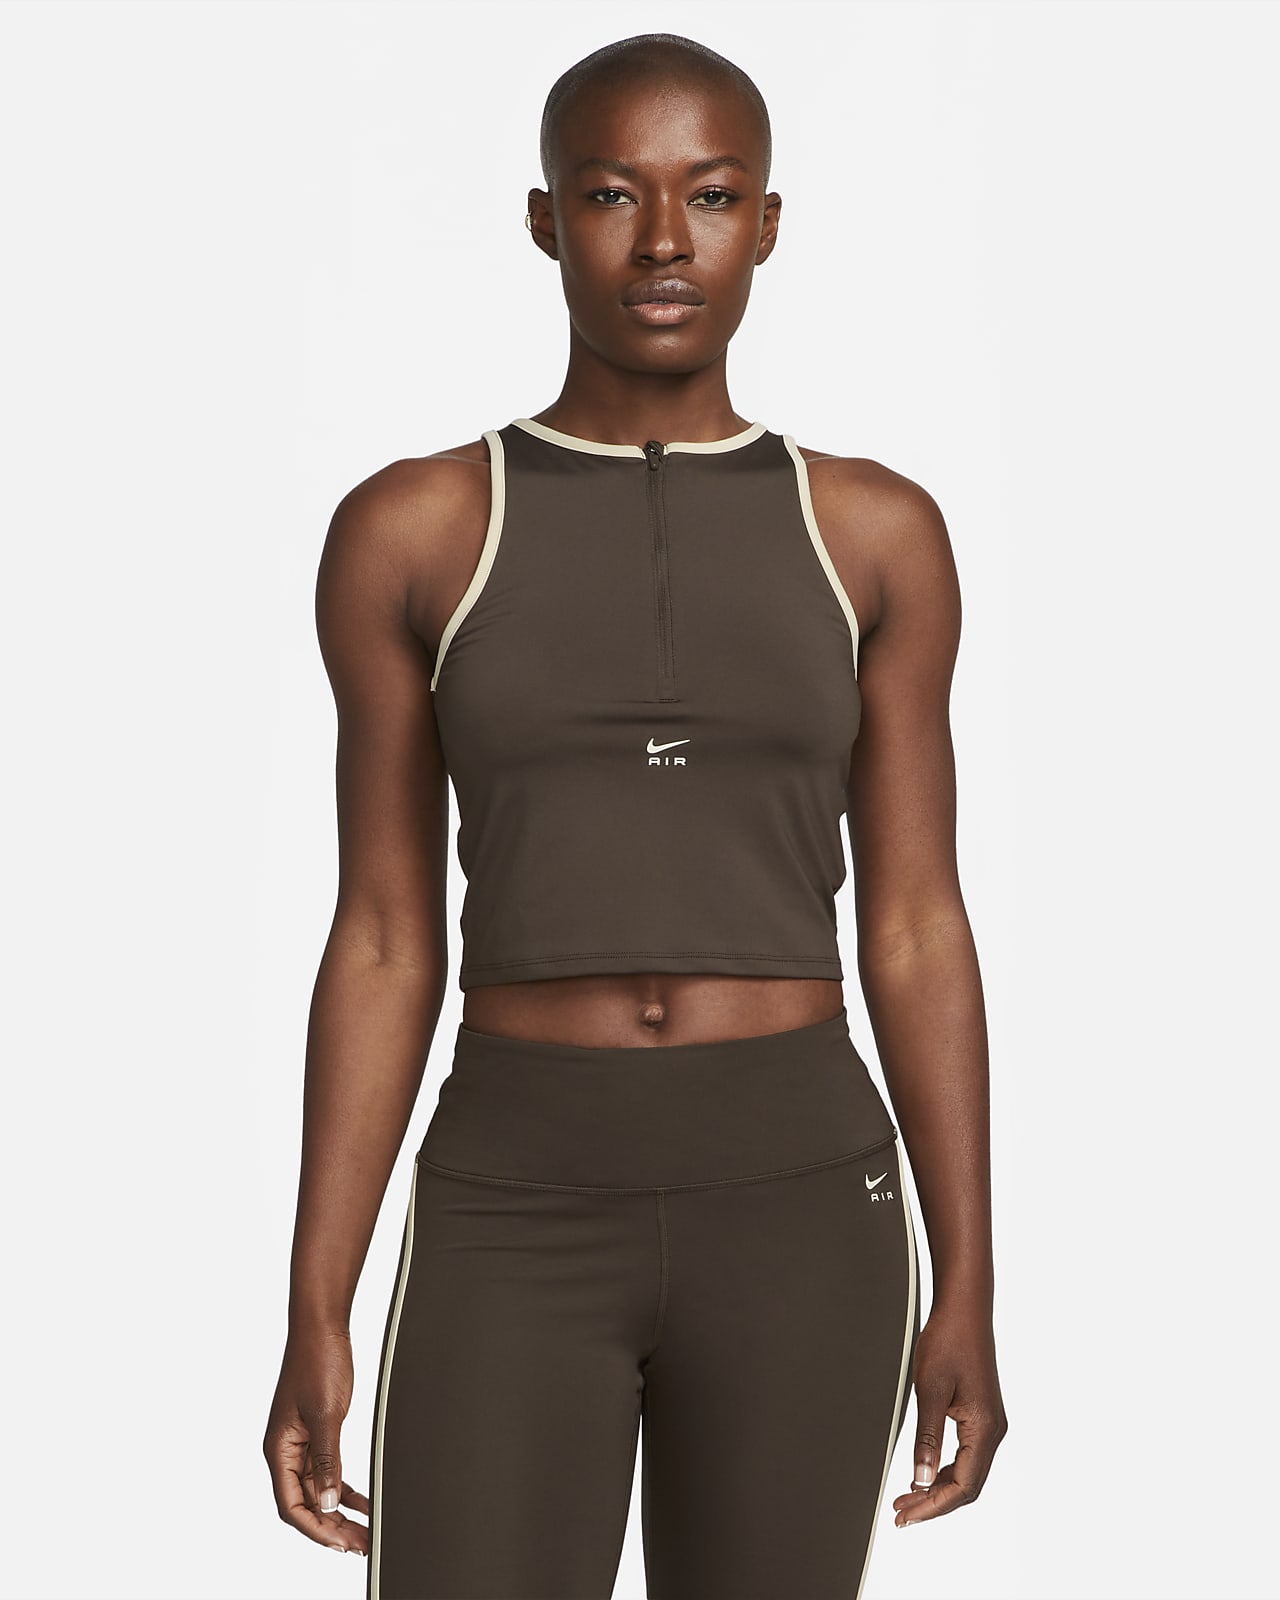 Women's Style Your Air Tight Dri-FIT. Nike LU